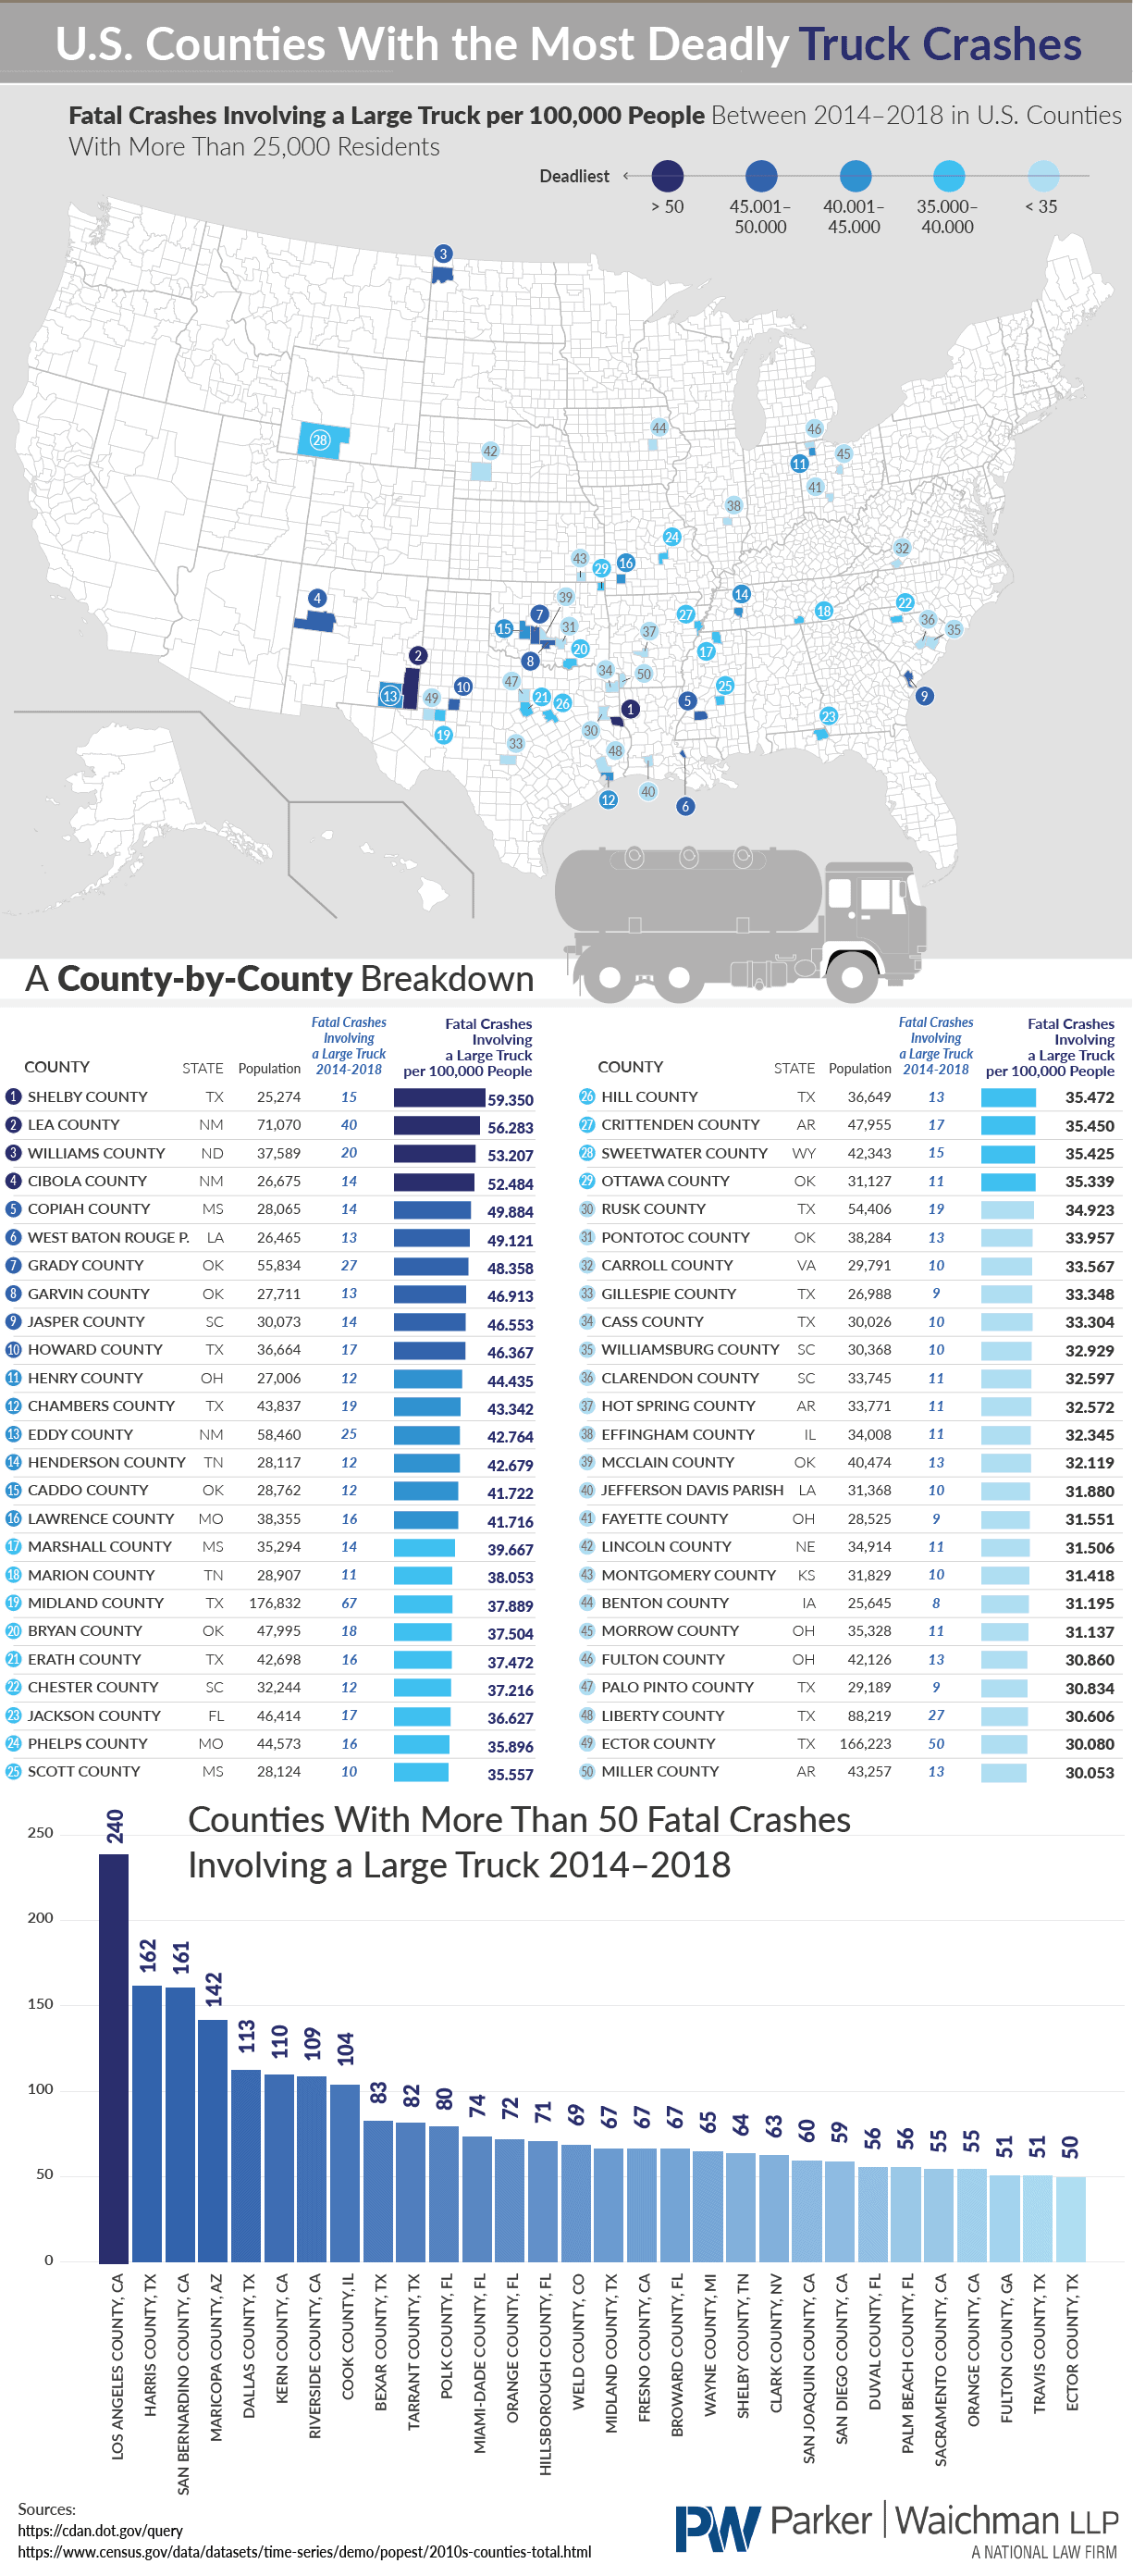 Counties with the Deadliest Truck Crashes